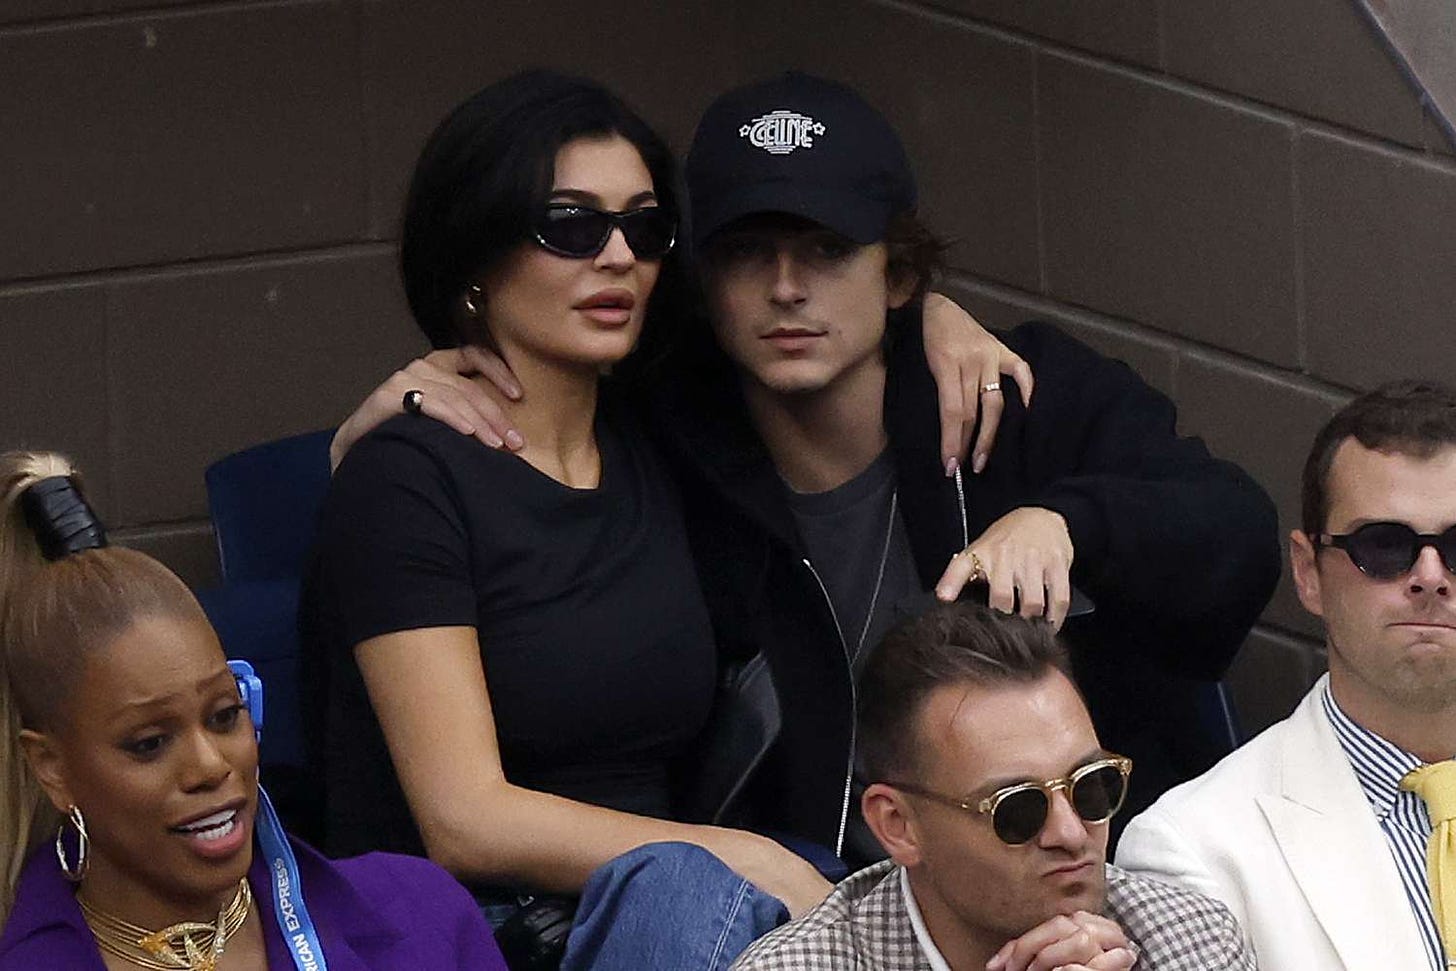 Kylie Jenner and Timothée Chalamet Had a PDA-Filled Date at the US Open